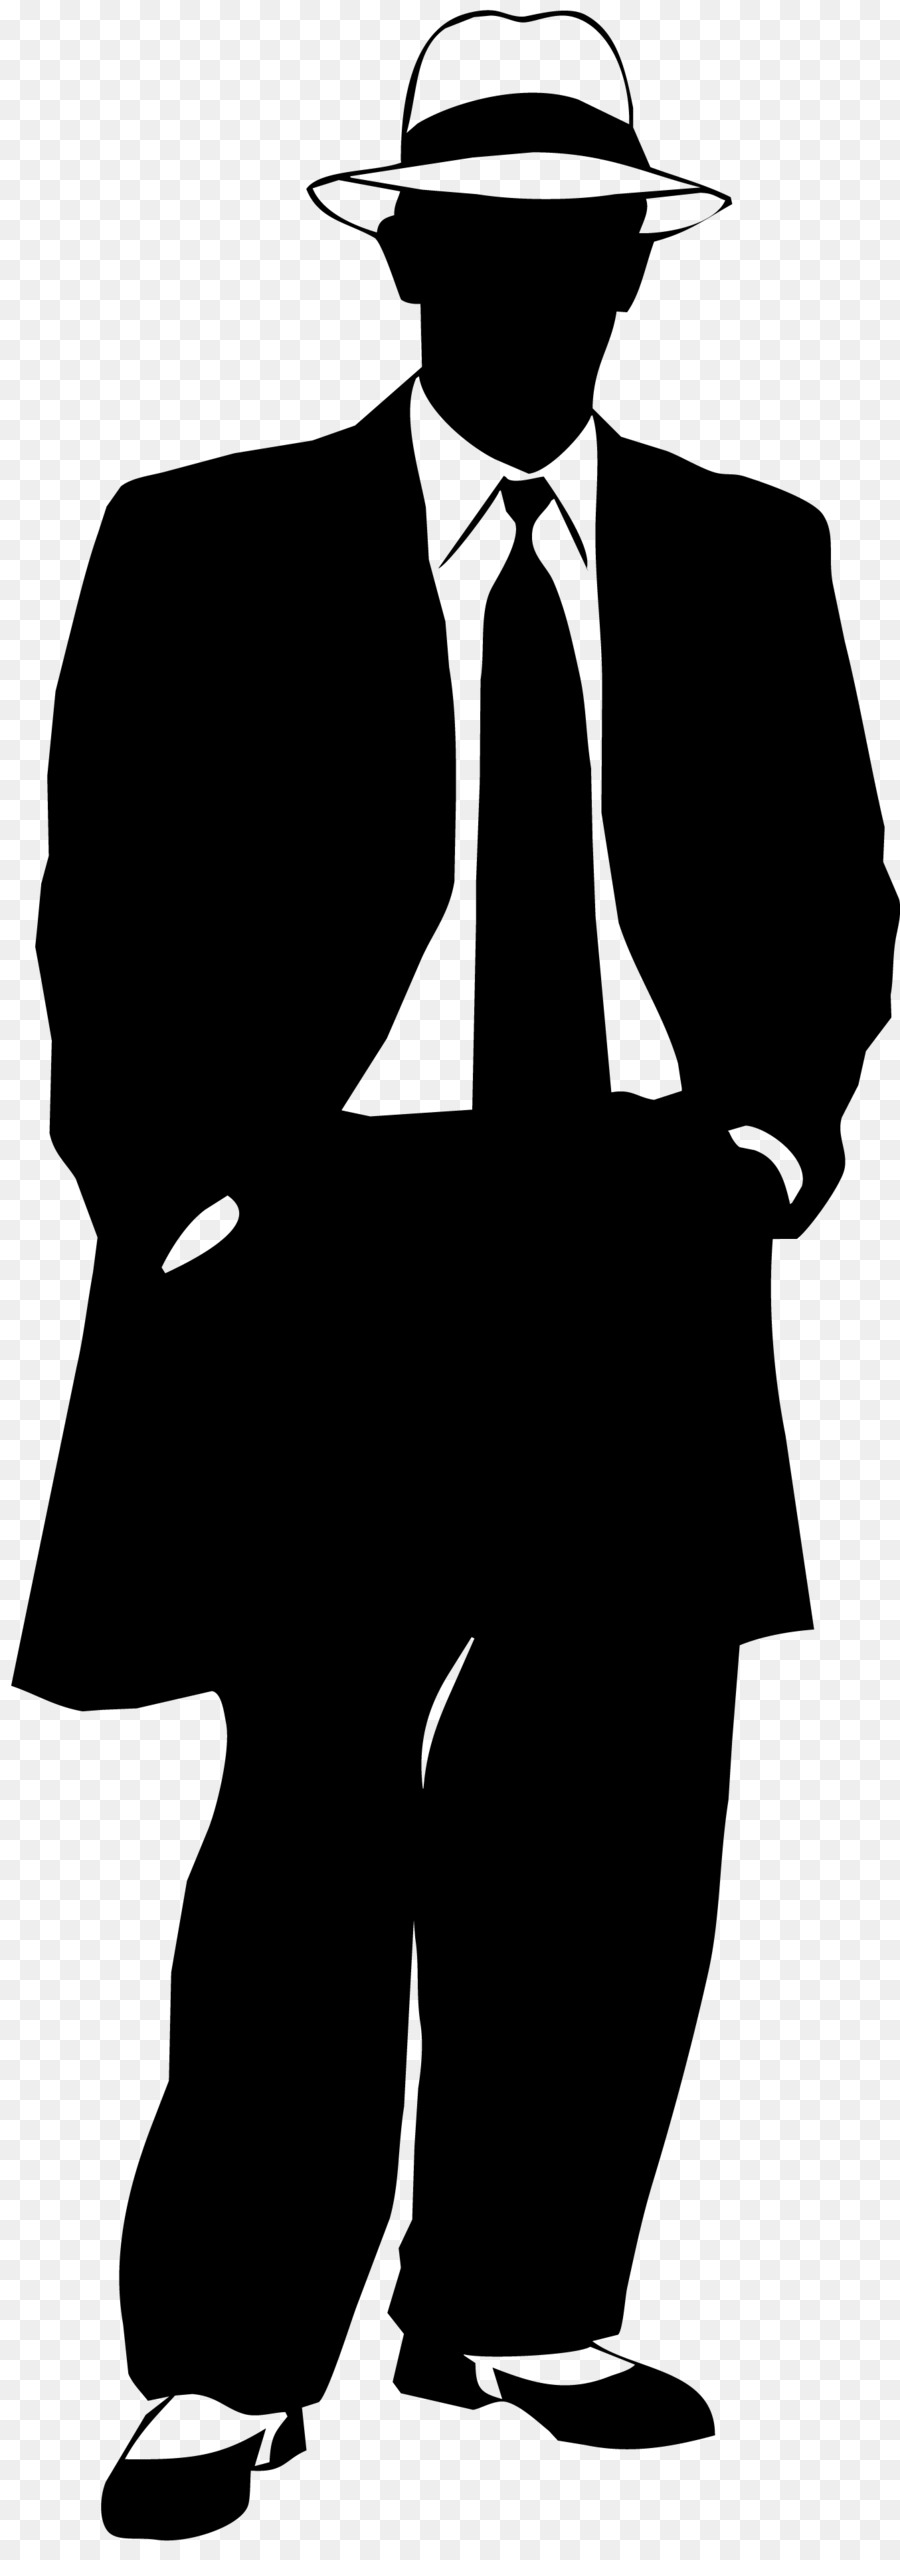 Gangster Silhouette - drawing silhouette png download - 1355*3840 - Free Transparent Gangster png Download.